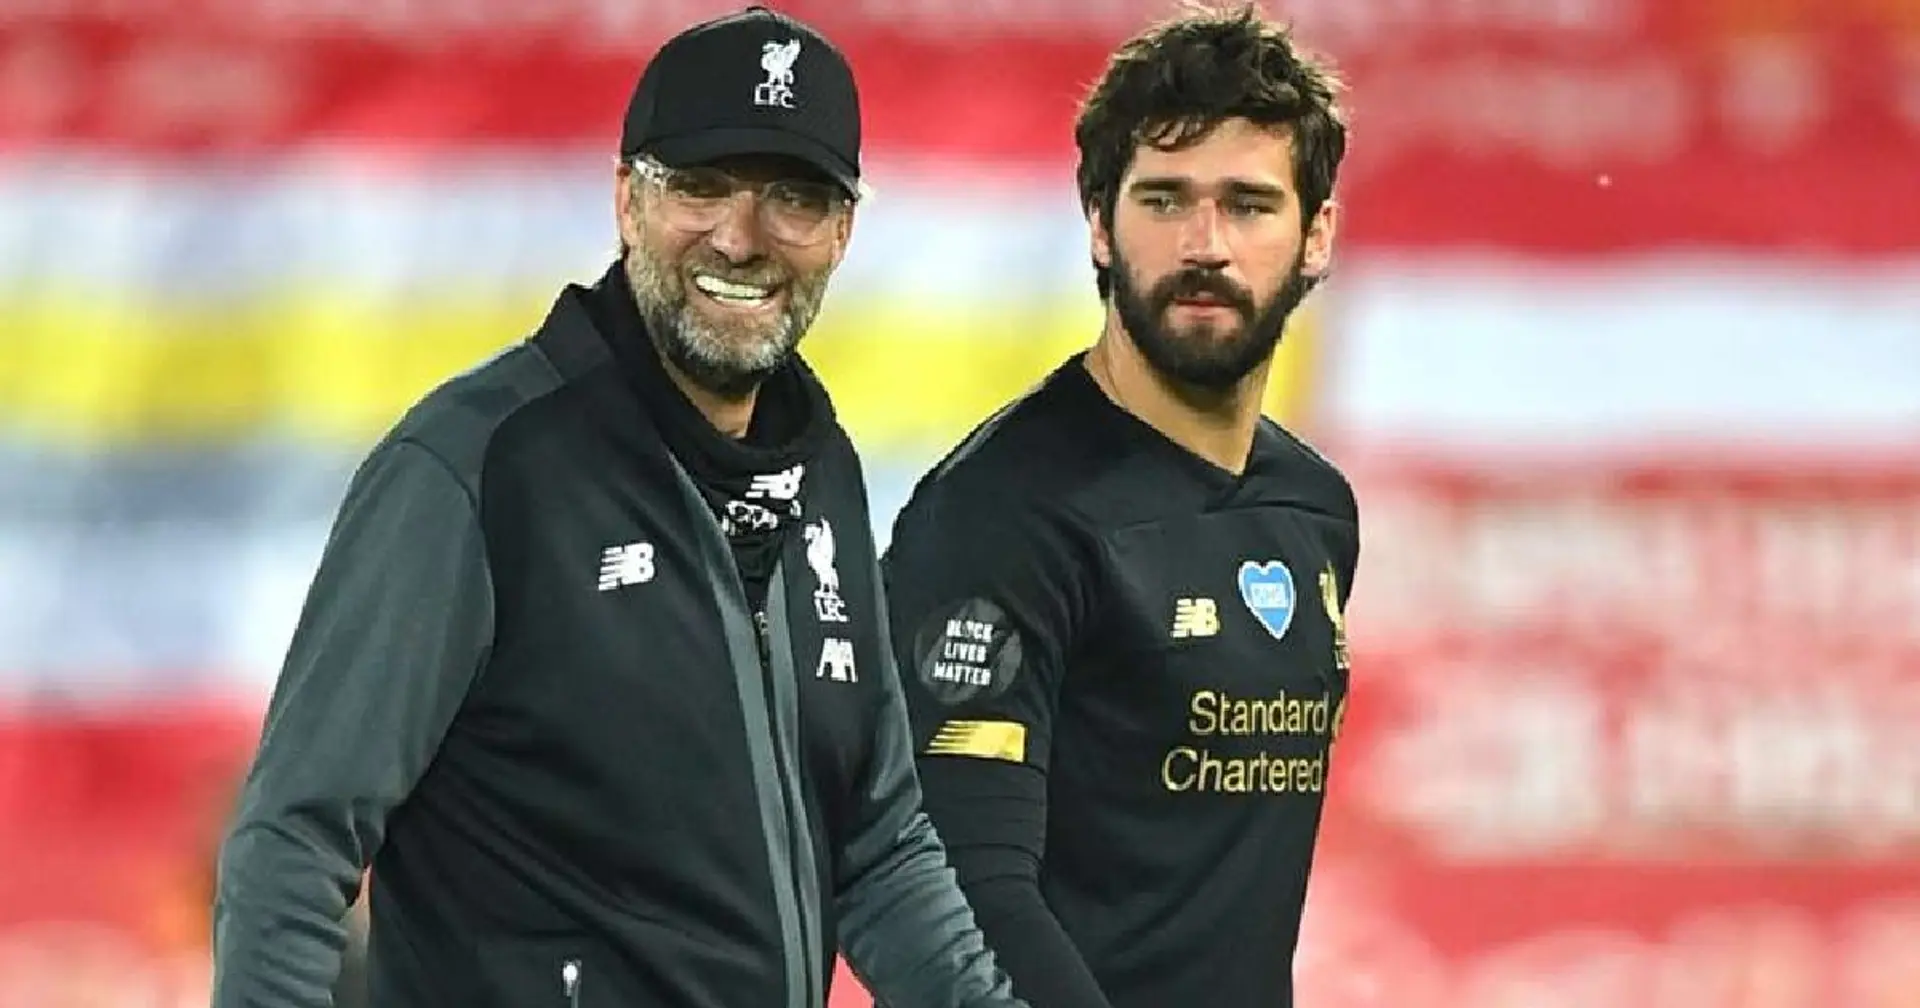 If we want to defend the title, we have to attack it: Alisson echoes Klopp's words